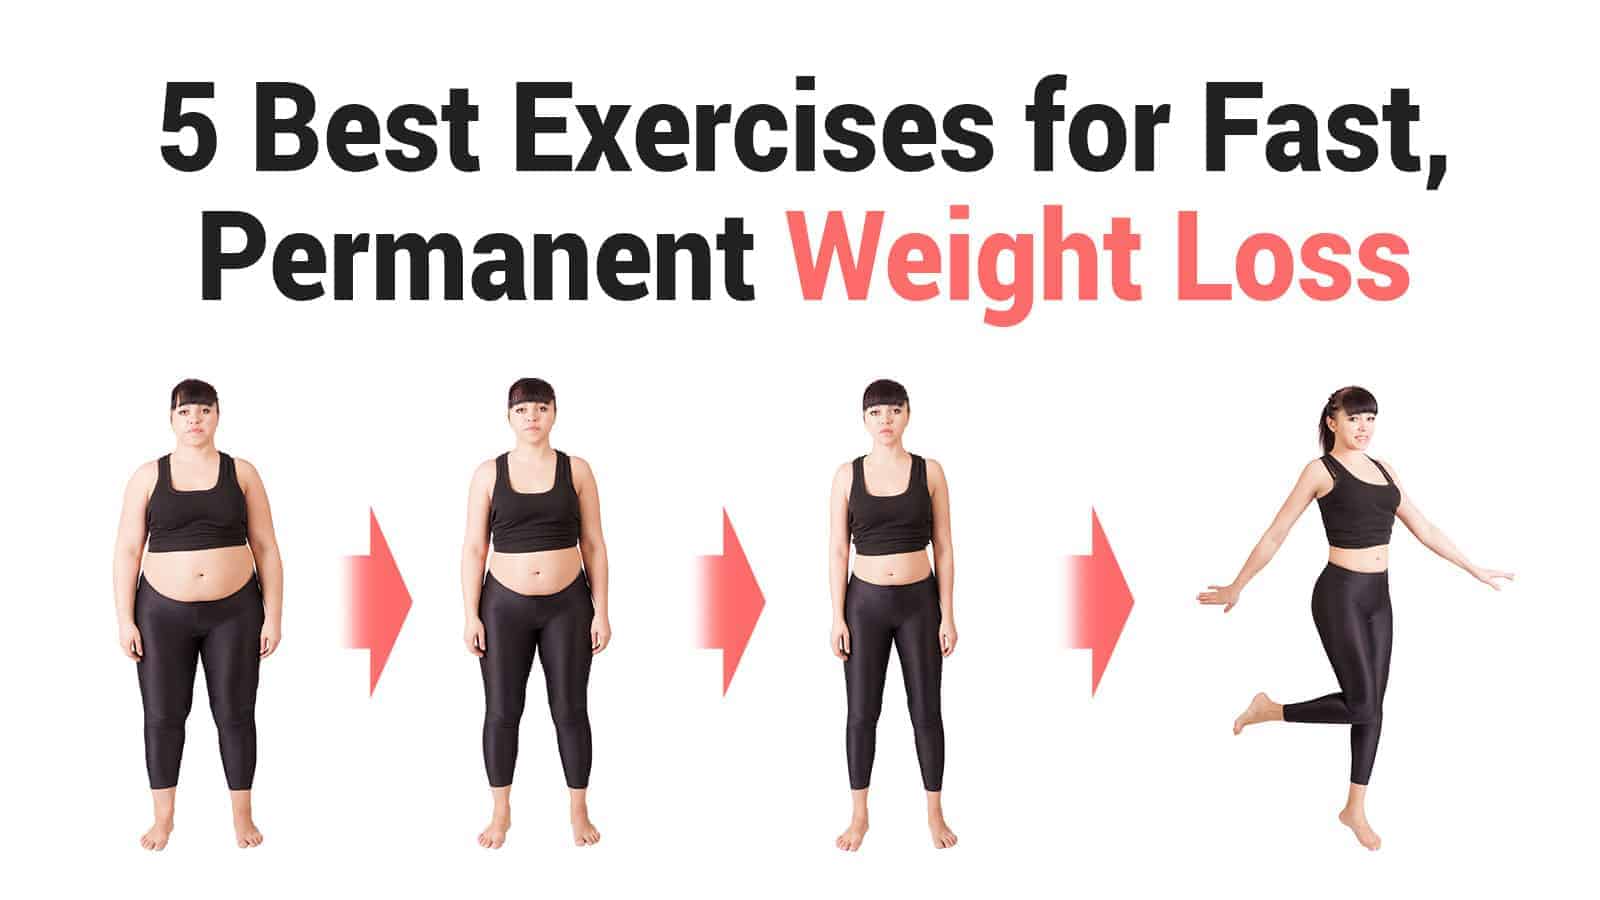 5 Best Exercises for Fast, Permanent Weight Loss